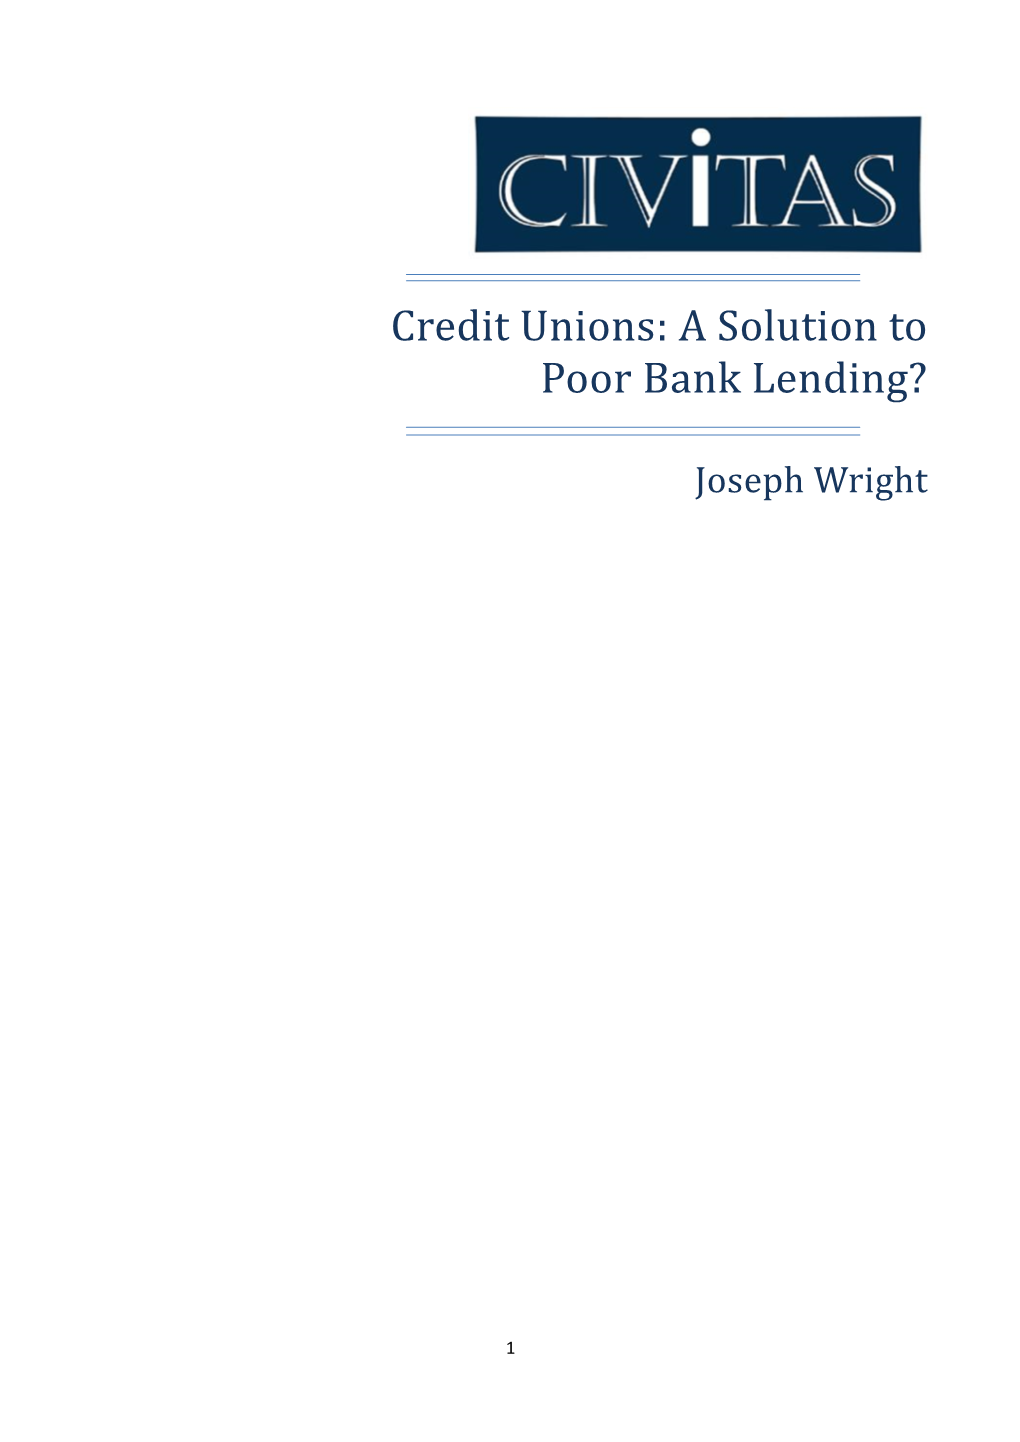 Credit Unions: a Solution to Poor Bank Lending?